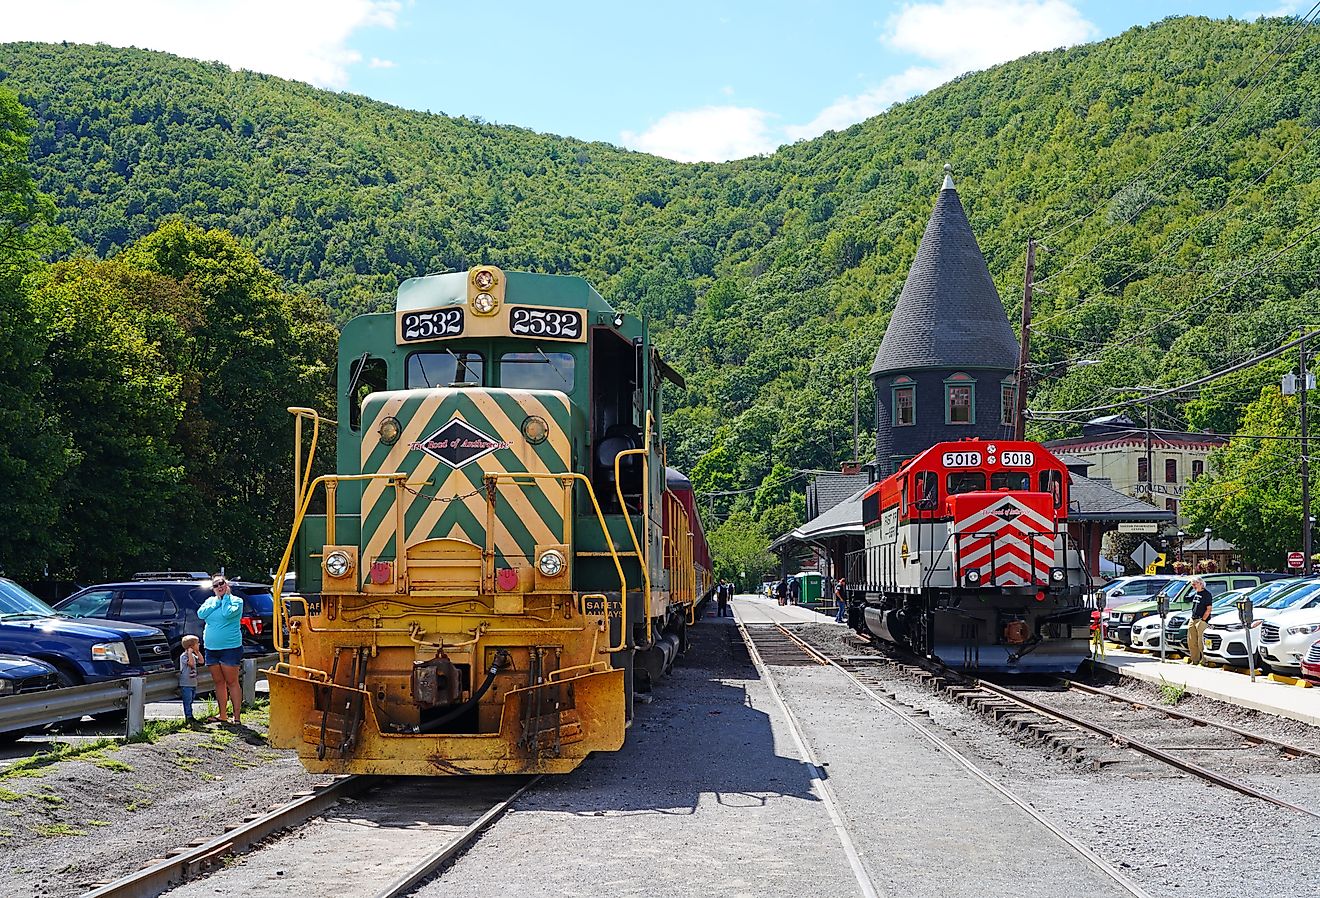 View of the historic Lehigh Gorge Scenic Railway of Reading & Northern Railroad in Jim Thorpe, Carbon County, Pennsylvania. Image credit EQRoy via Shutterstock.